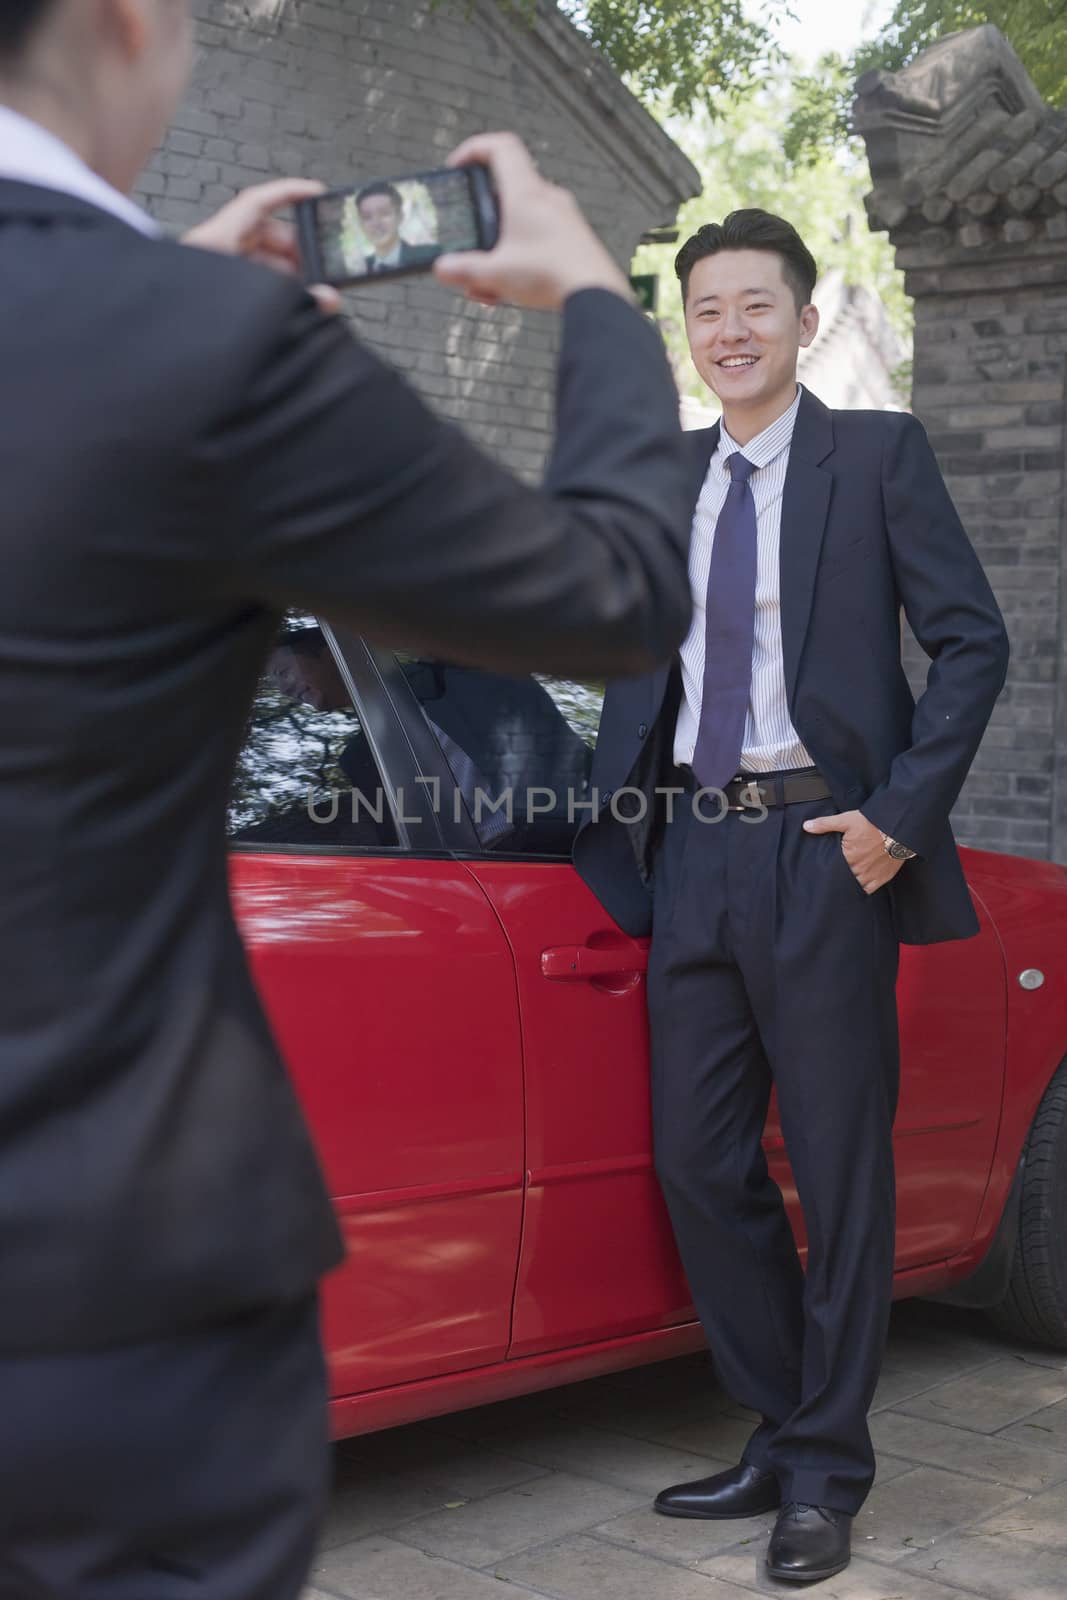 Businesswoman Taking Businessman's Picture Next to His Car